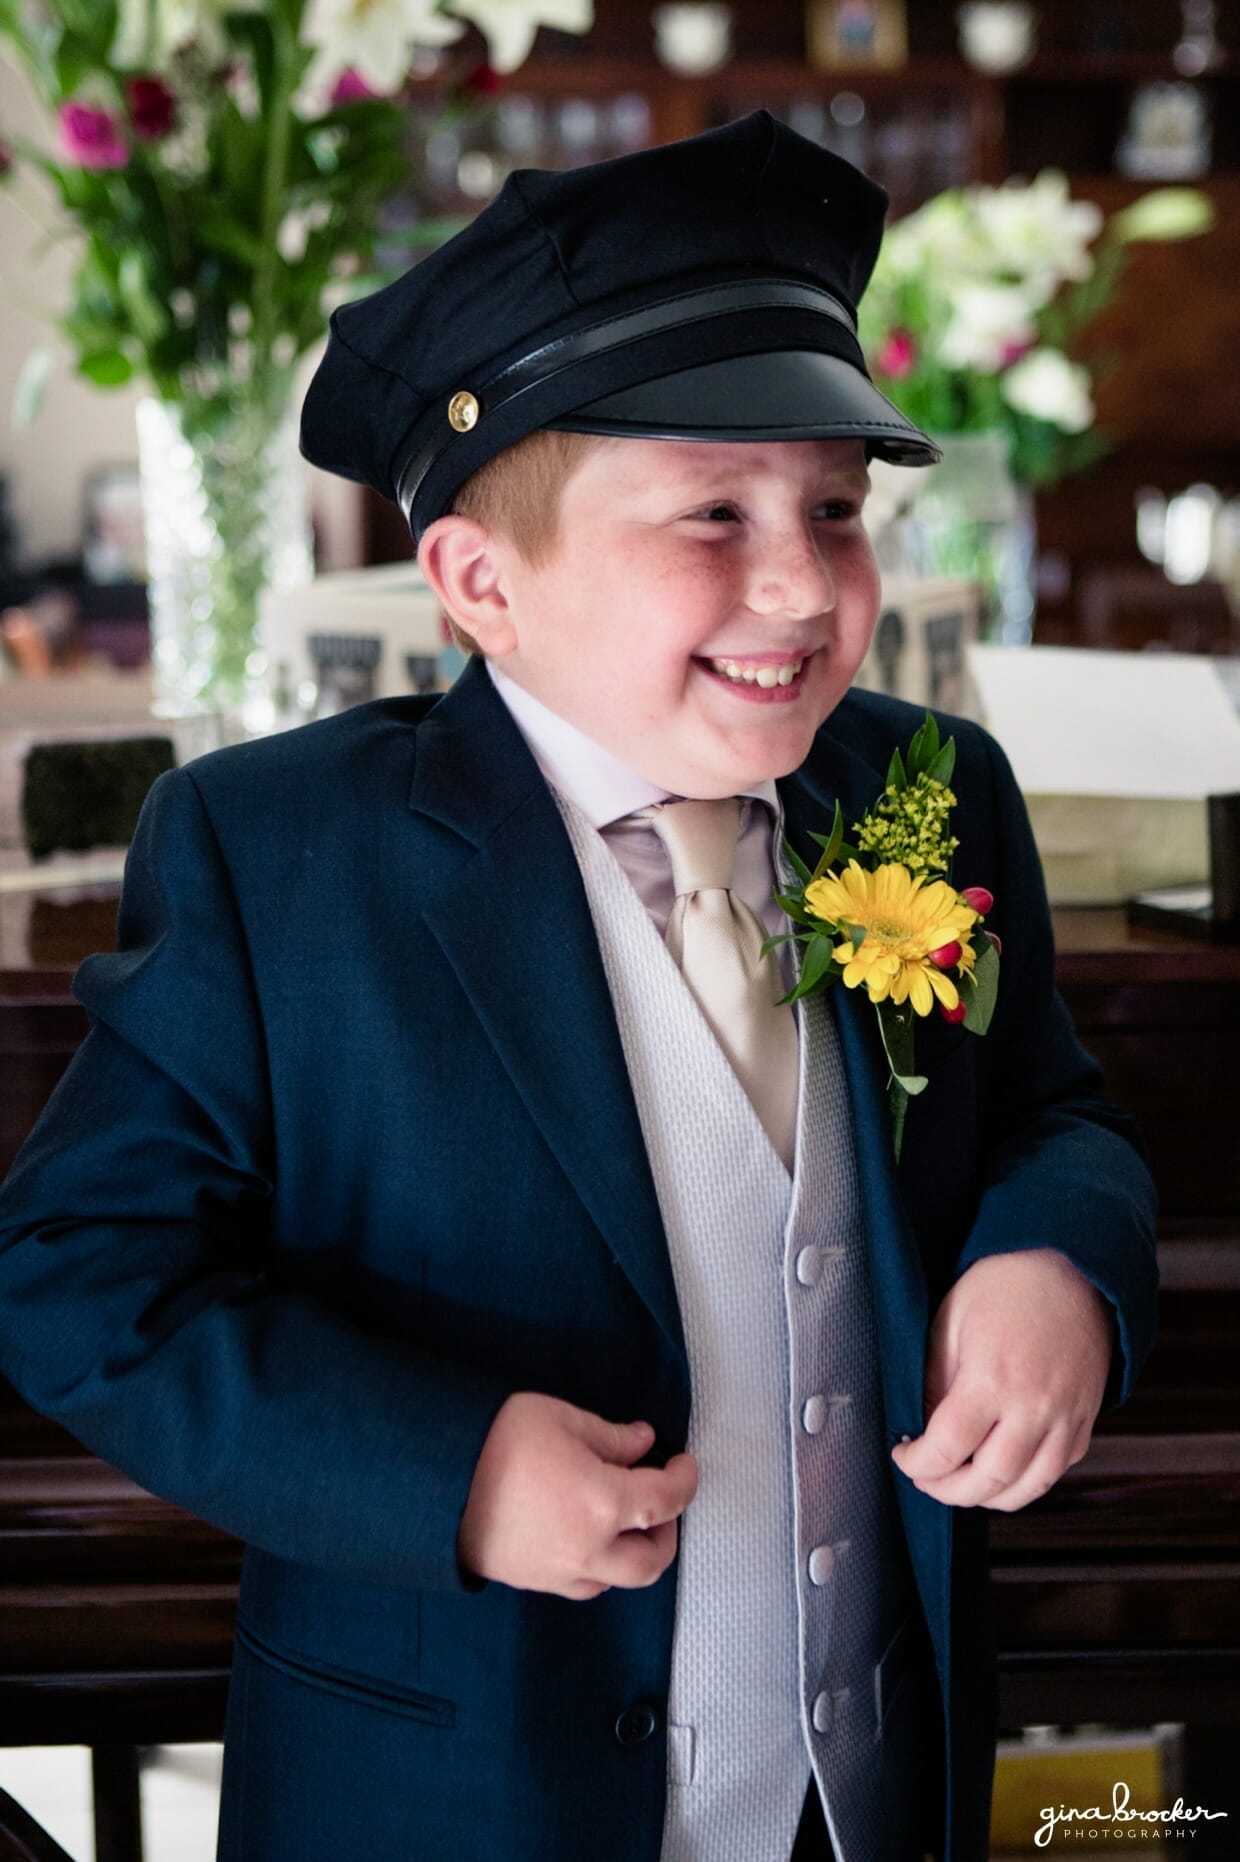 The ring bearer laughs as he wears the drivers hat on the morning of the wedding